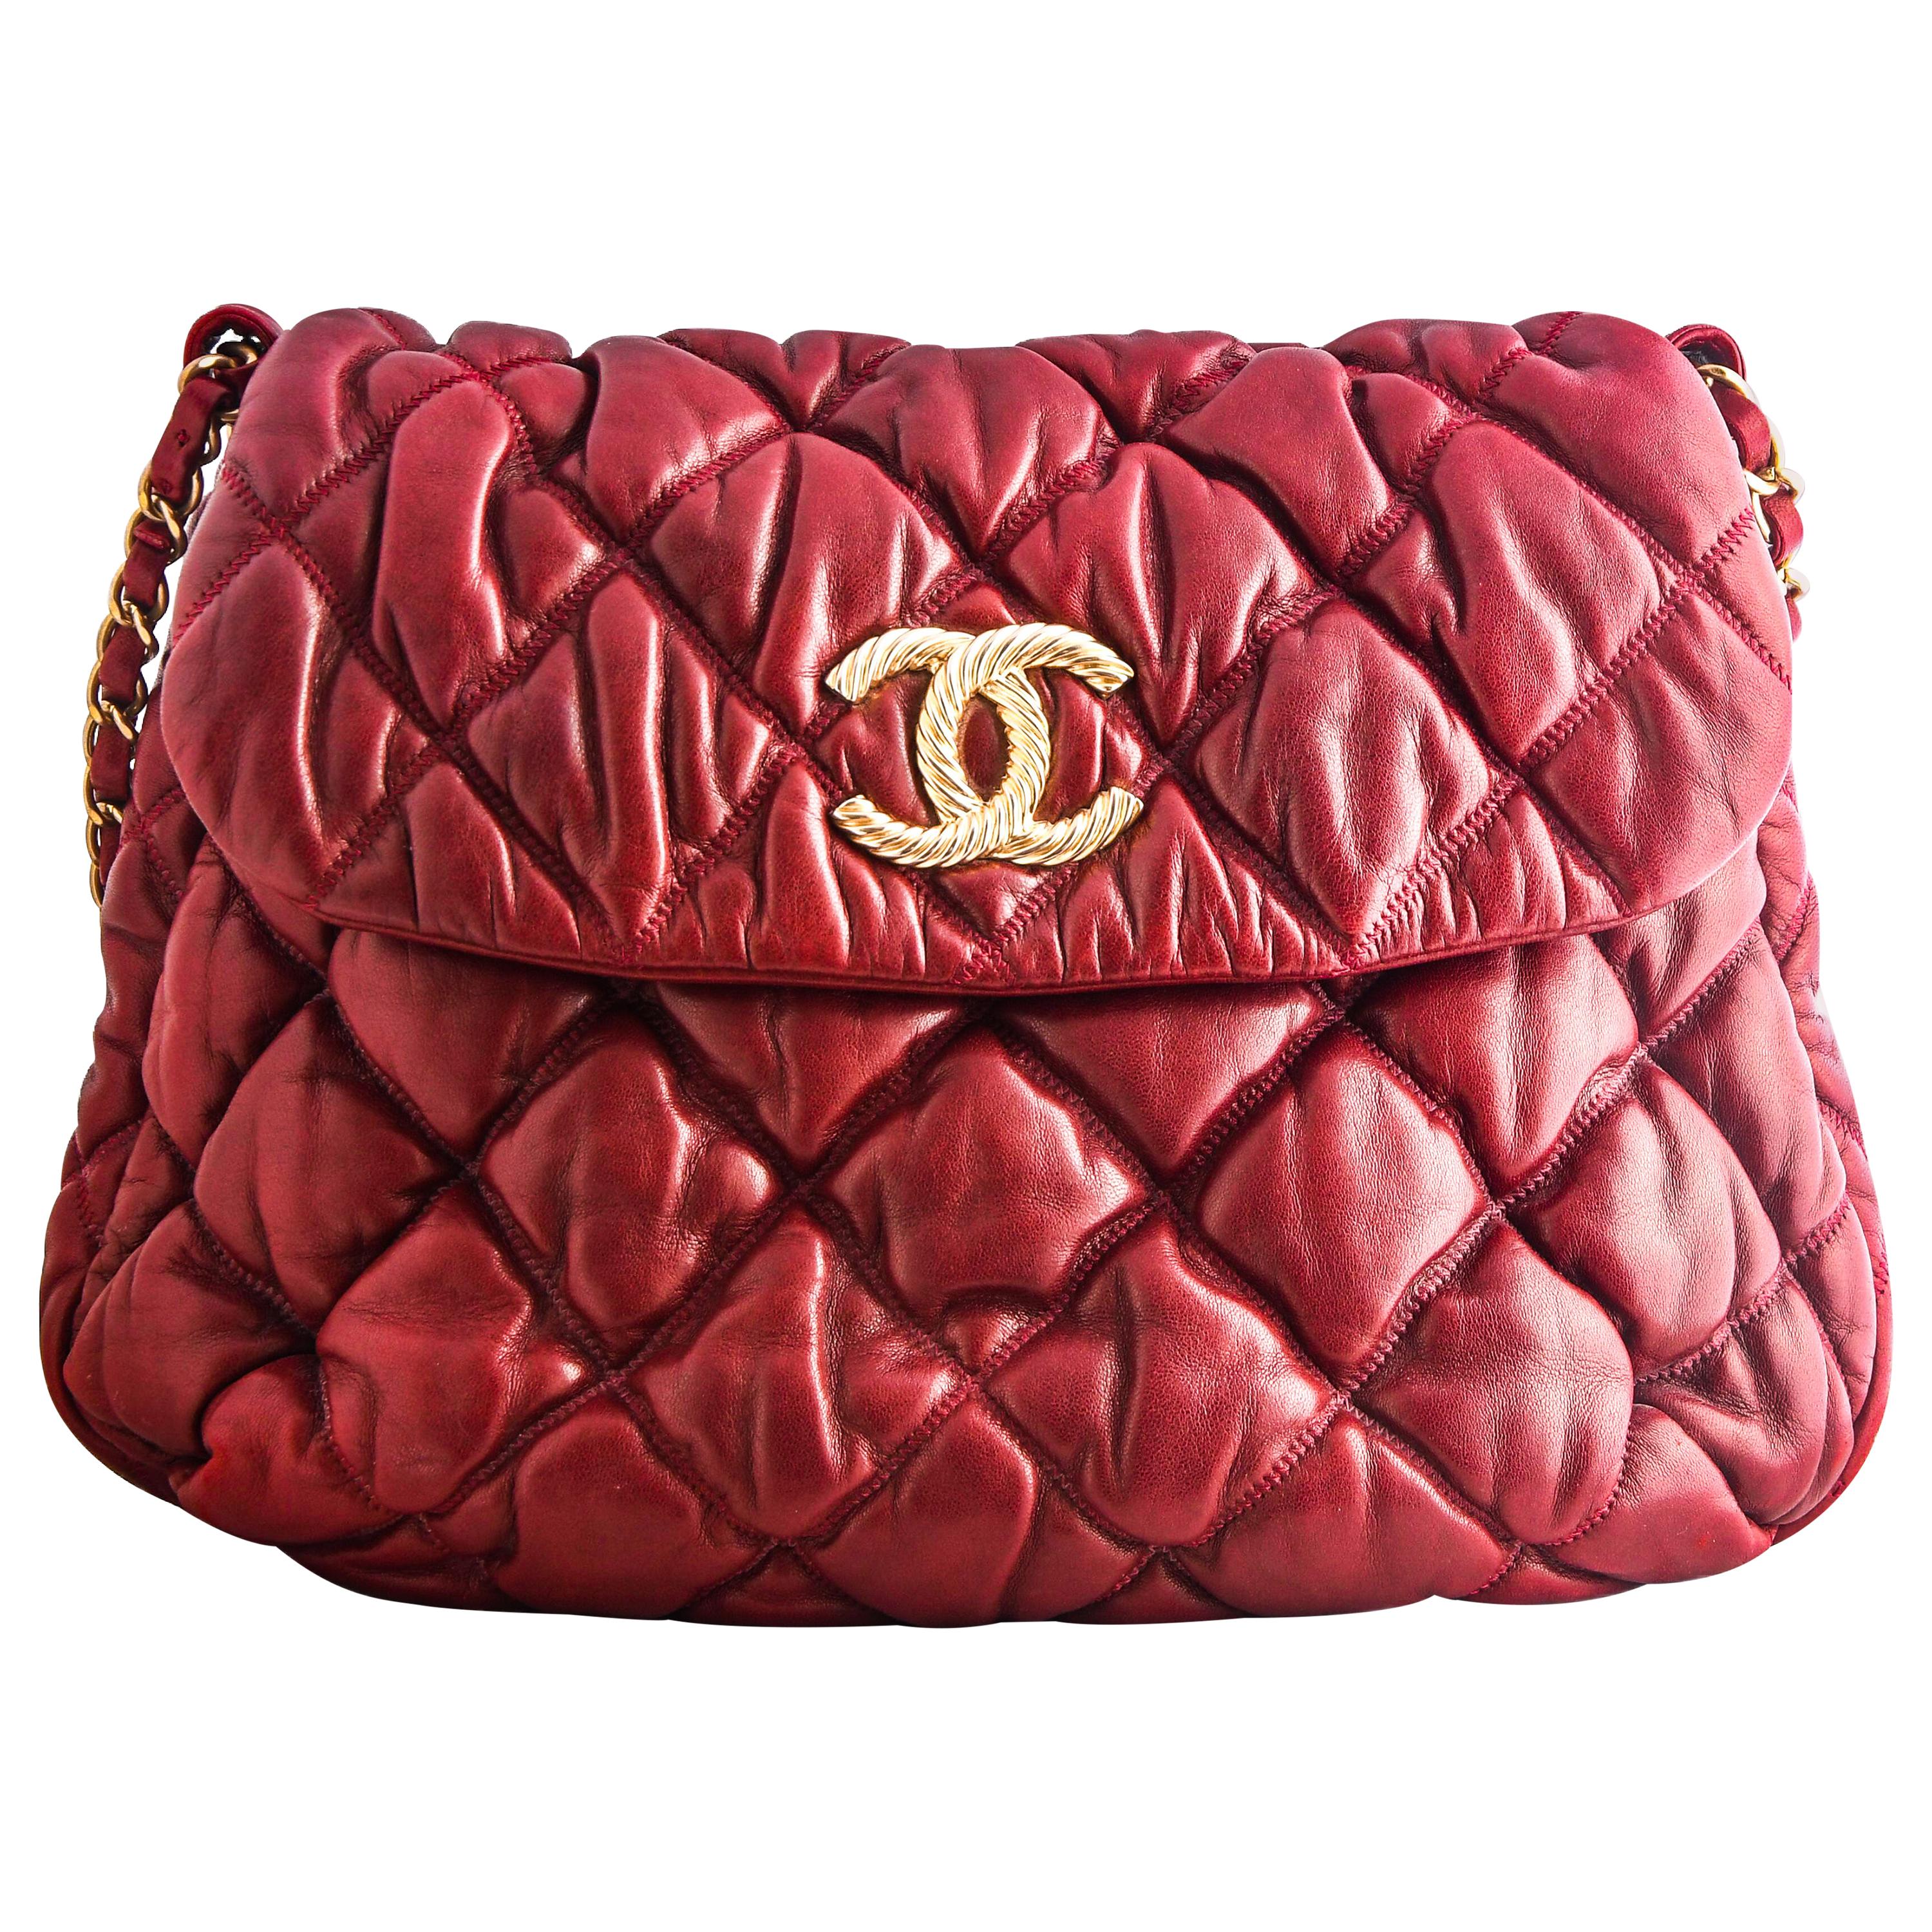 New CHANEL Hand bags - Burgundy_Caramel_Light Yellow Regular size -  clothing & accessories - by owner - apparel sale 